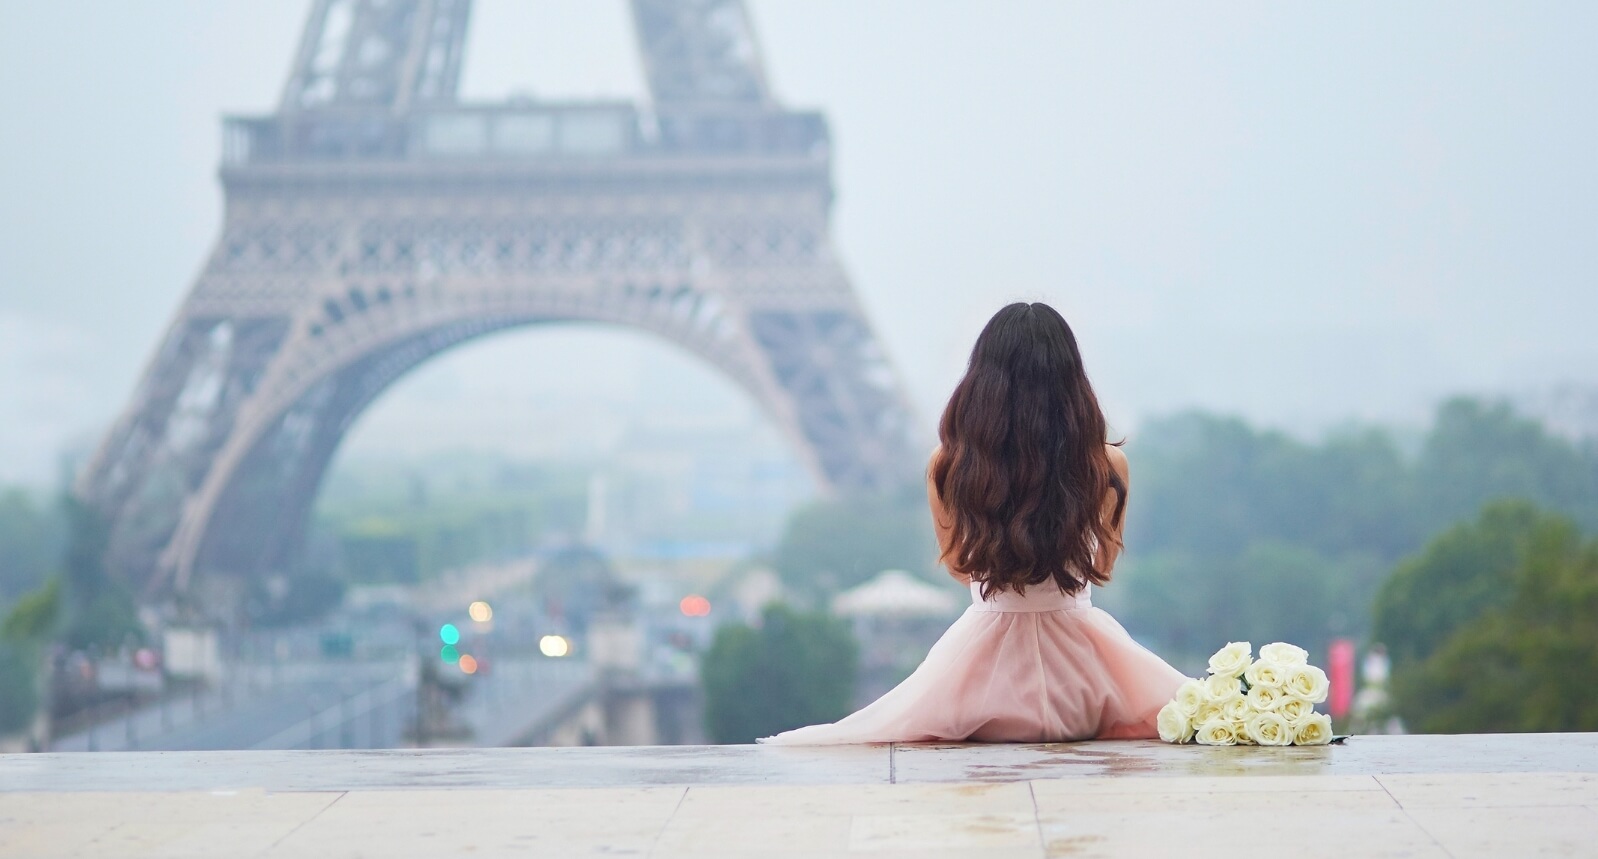 Woman in a pink dress sitting with a bouquet of white roses overlooking the Eiffel Tower, evoking the romantic aura of French inspired candles.